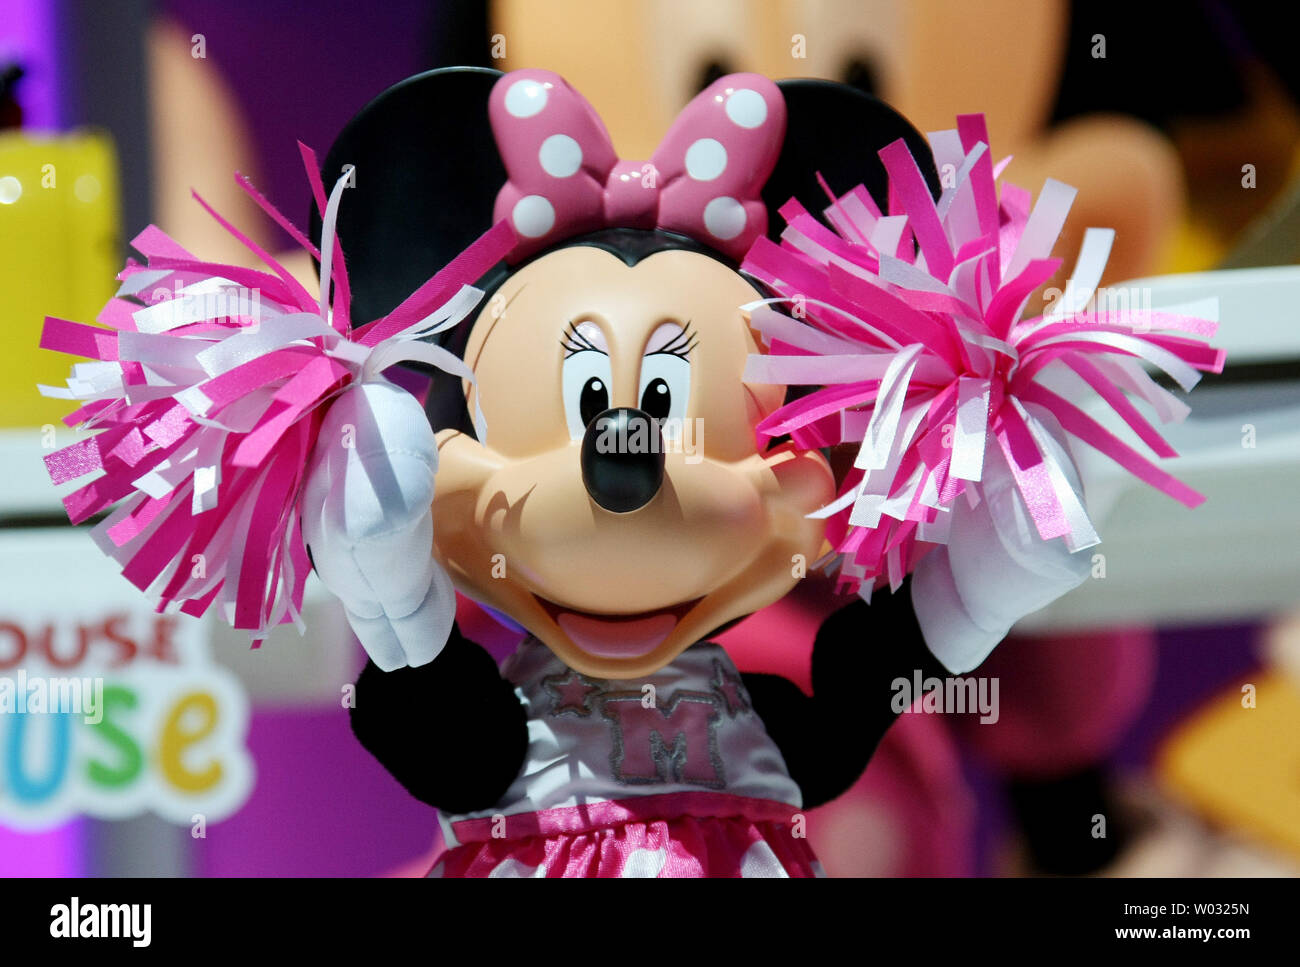 The new cheerleader Minnie Mouse is unveiled at the 110th annual American International Toy Fair held at the Jacob Javits Center  in New York City on February 10, 2013.     UPI /Monika Graff Stock Photo